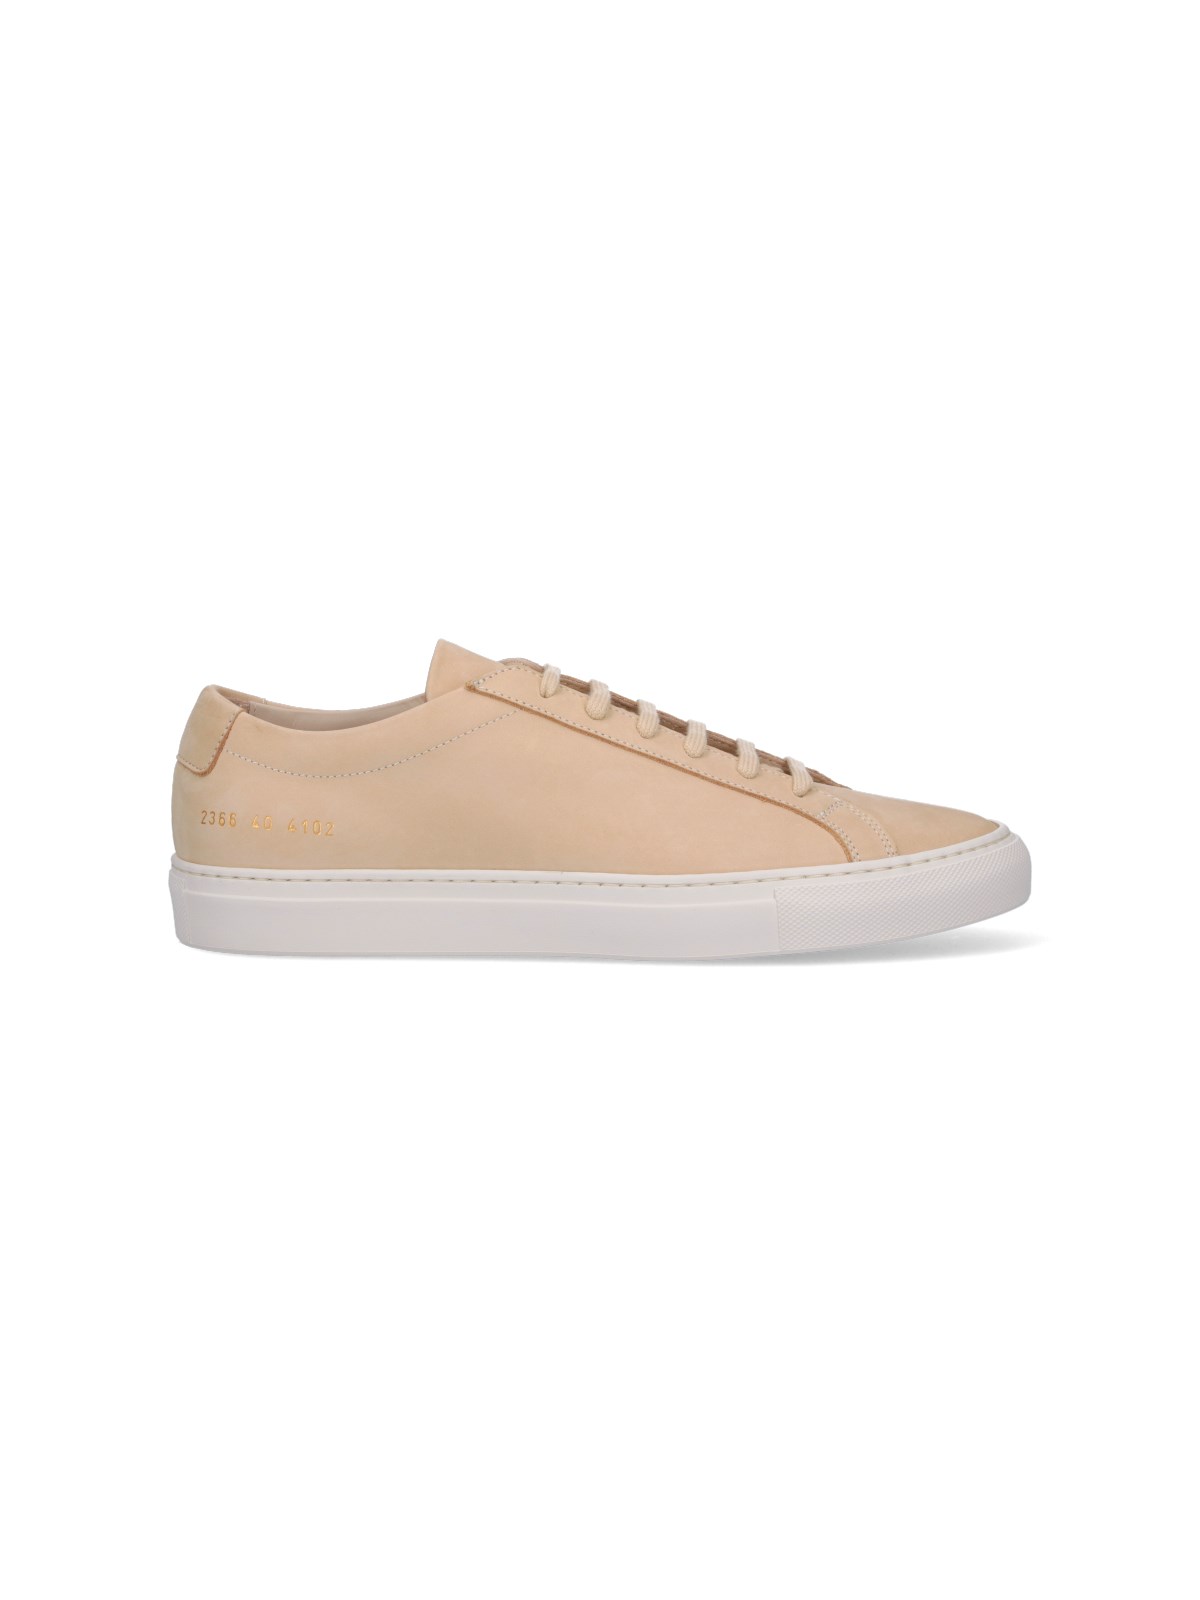 Common Projects Achilles Leather Sneakers In Beige